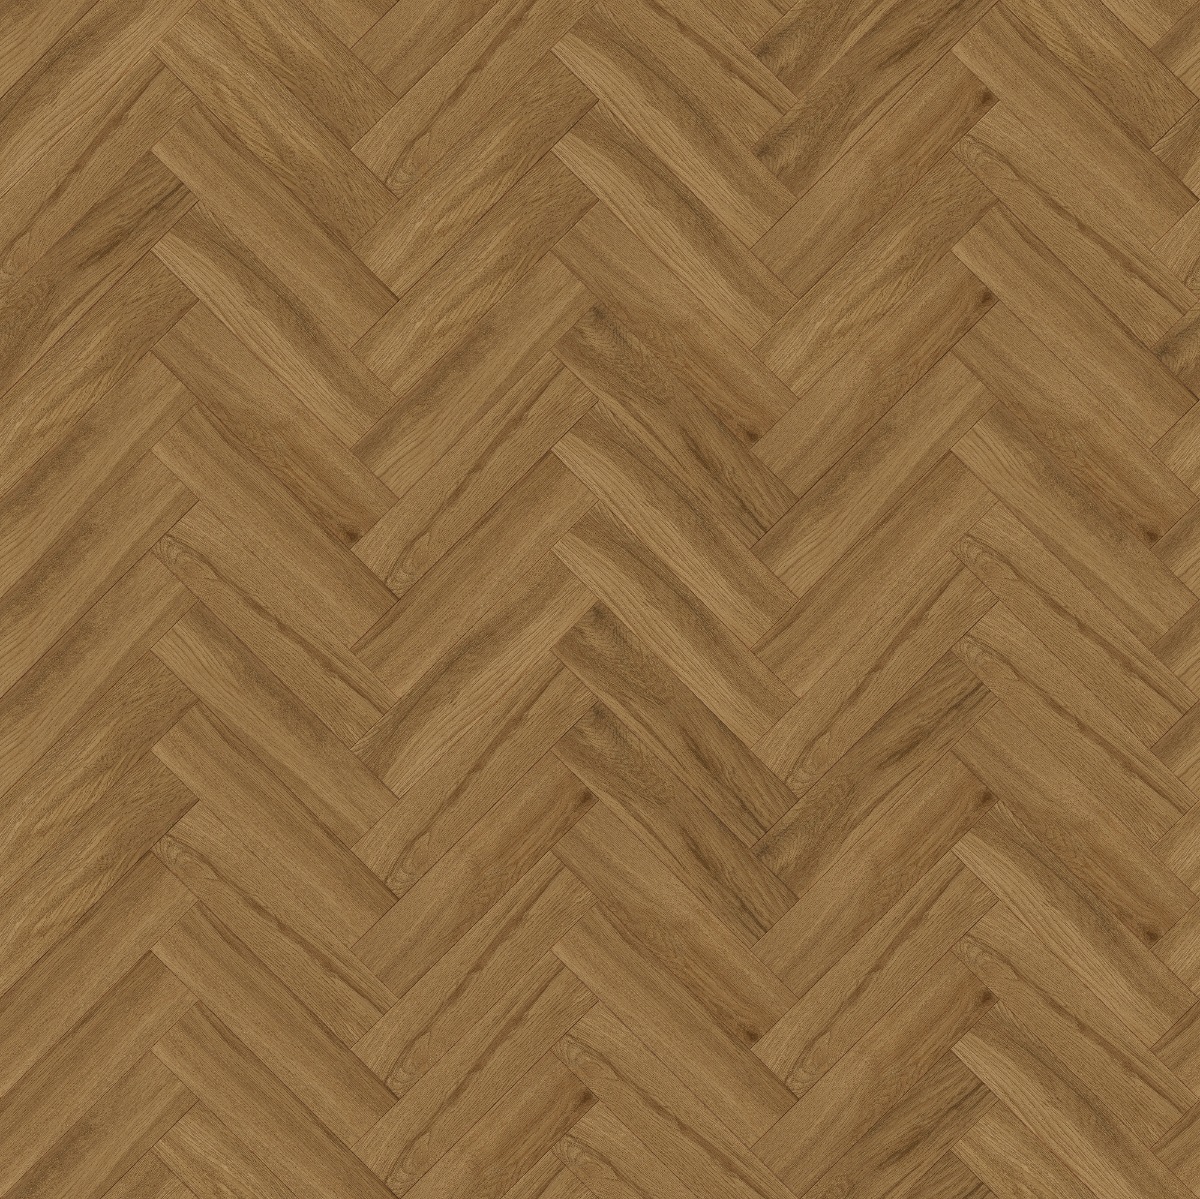 A seamless vinyl texture with vero sorrento units arranged in a Herringbone pattern